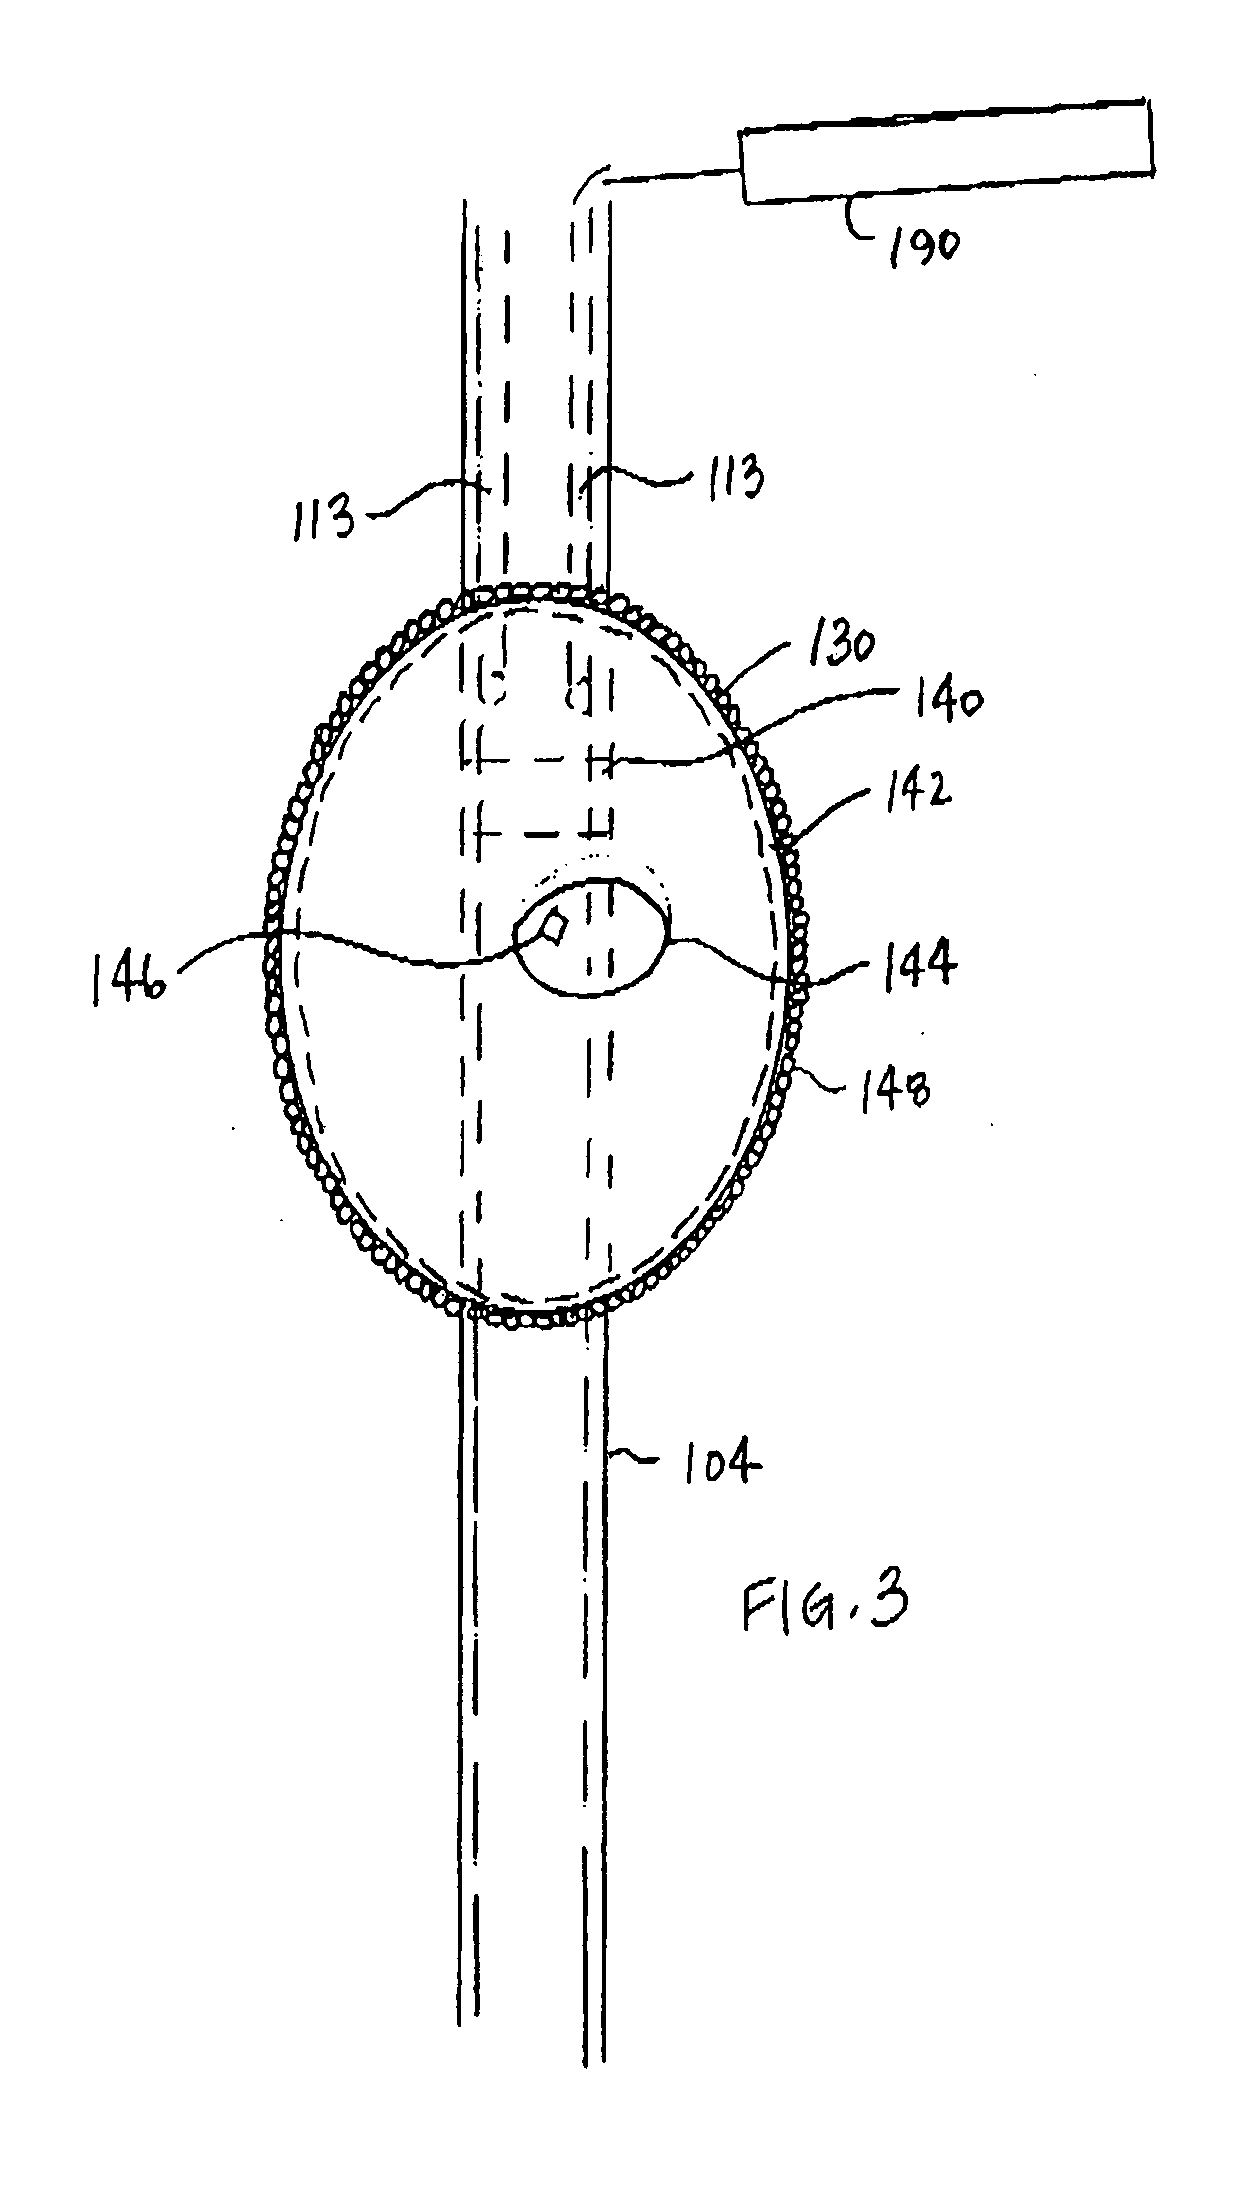 Biologic device for regulation of gene expression and method therefor